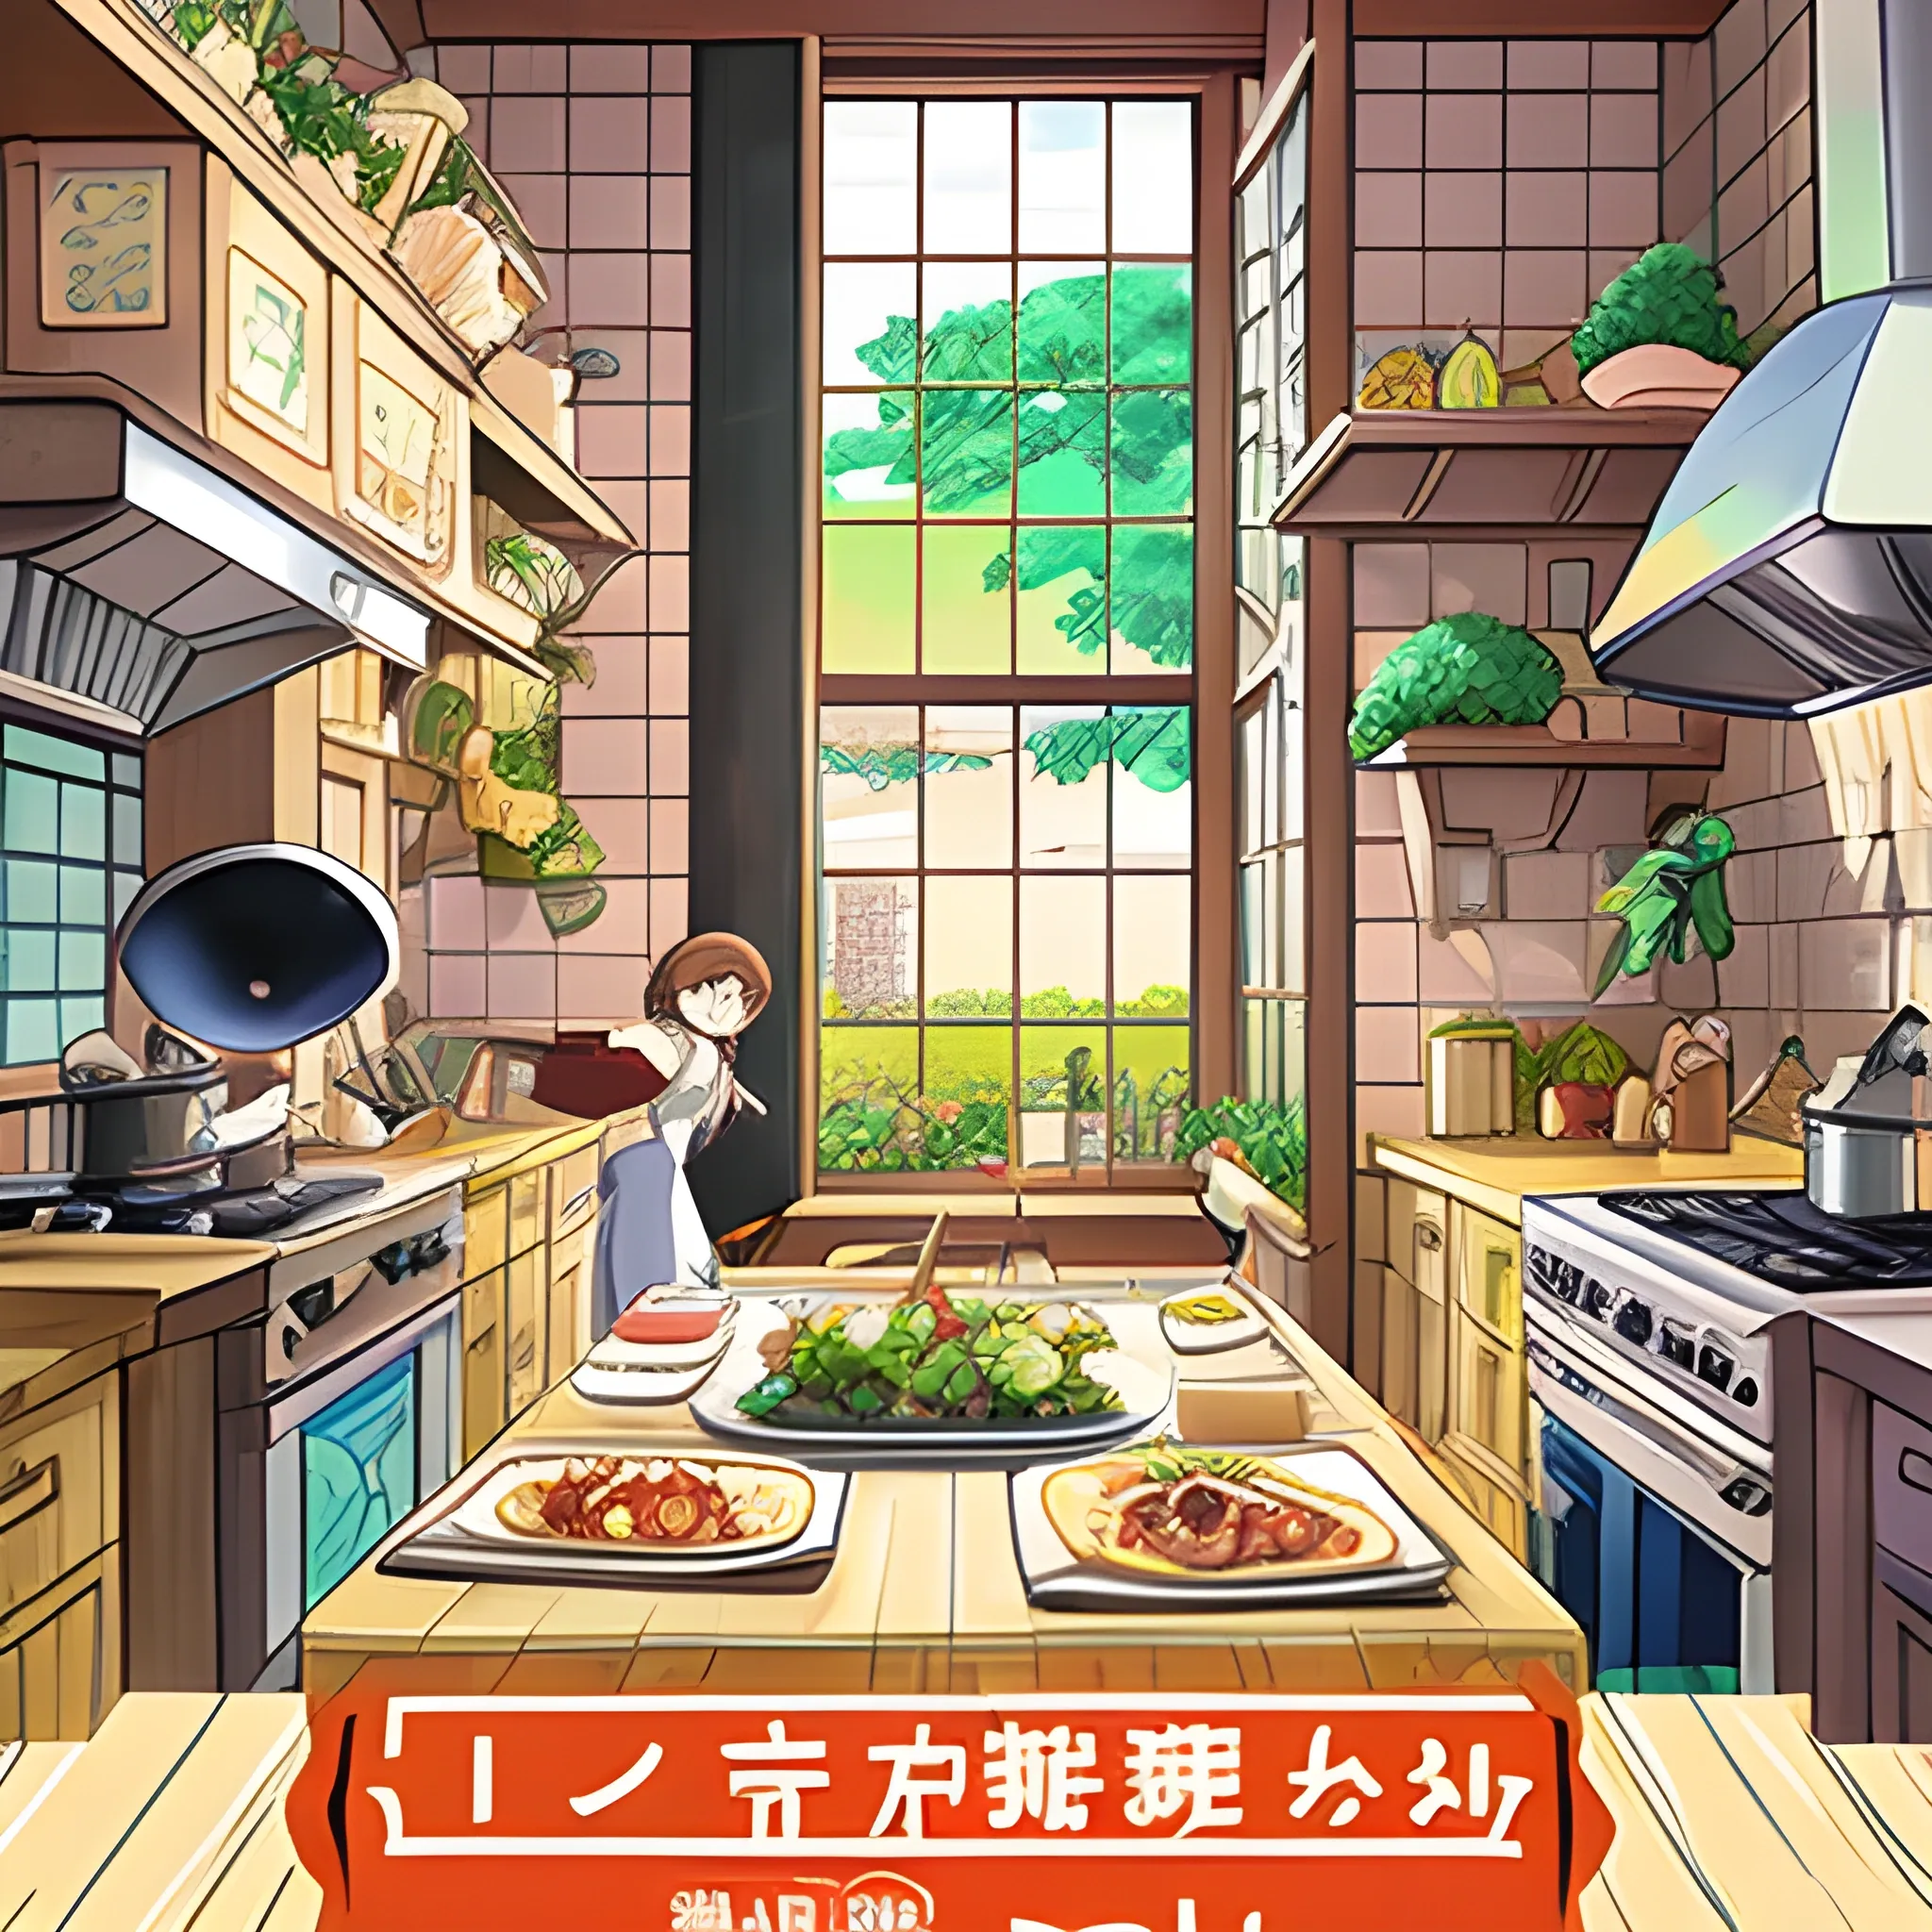 Baking In The Kitchen - Other & Anime Background Wallpapers on Desktop  Nexus (Image 1349701)